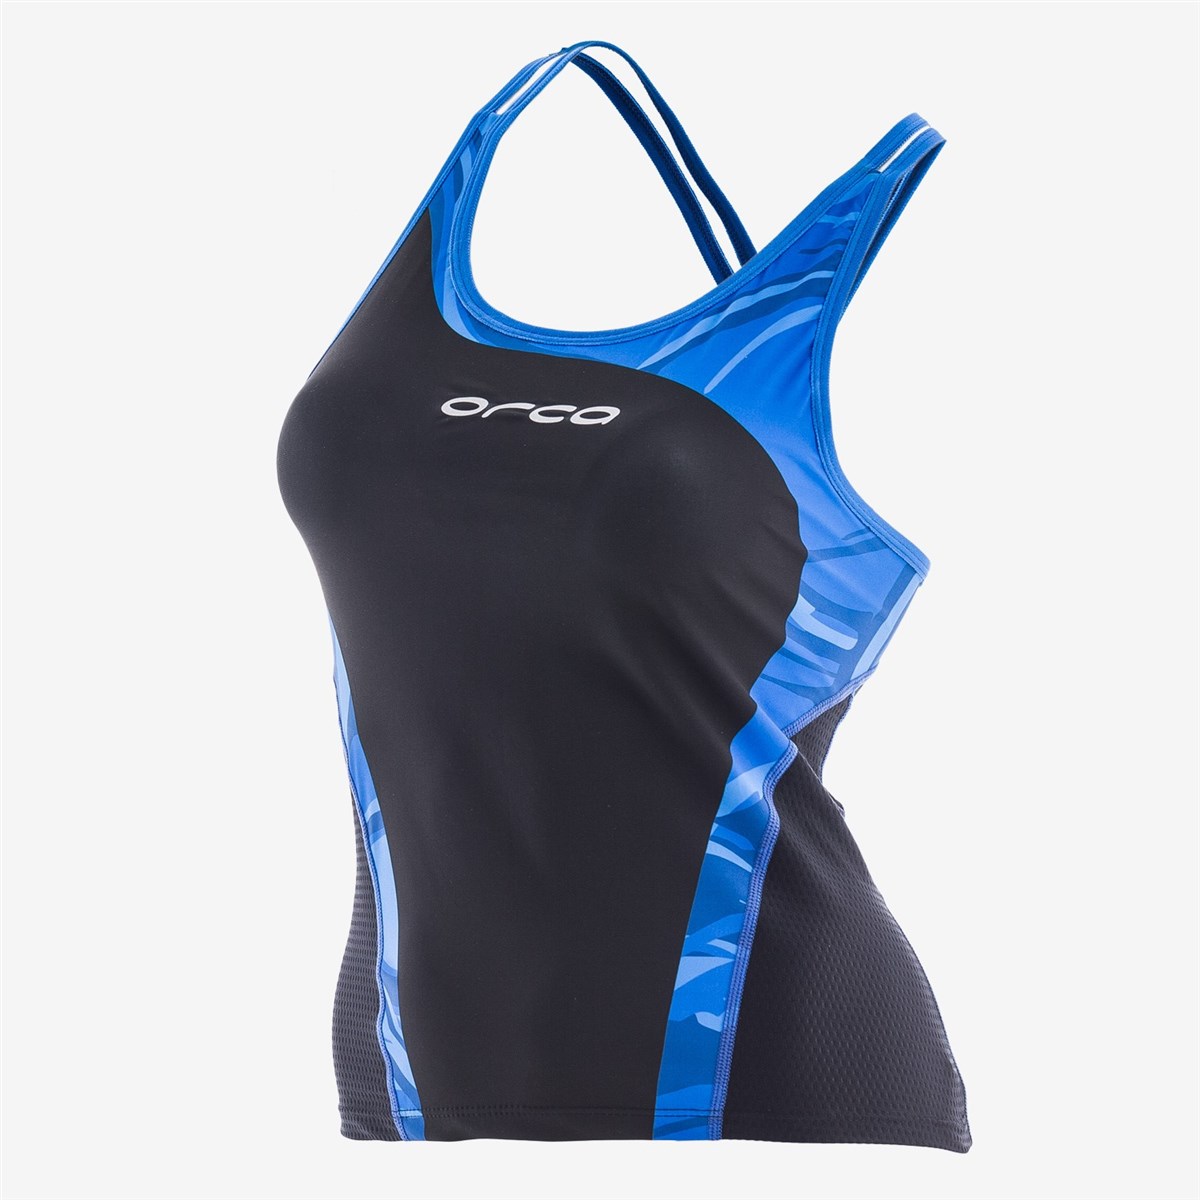 Orca Womens 226 Singlet product image